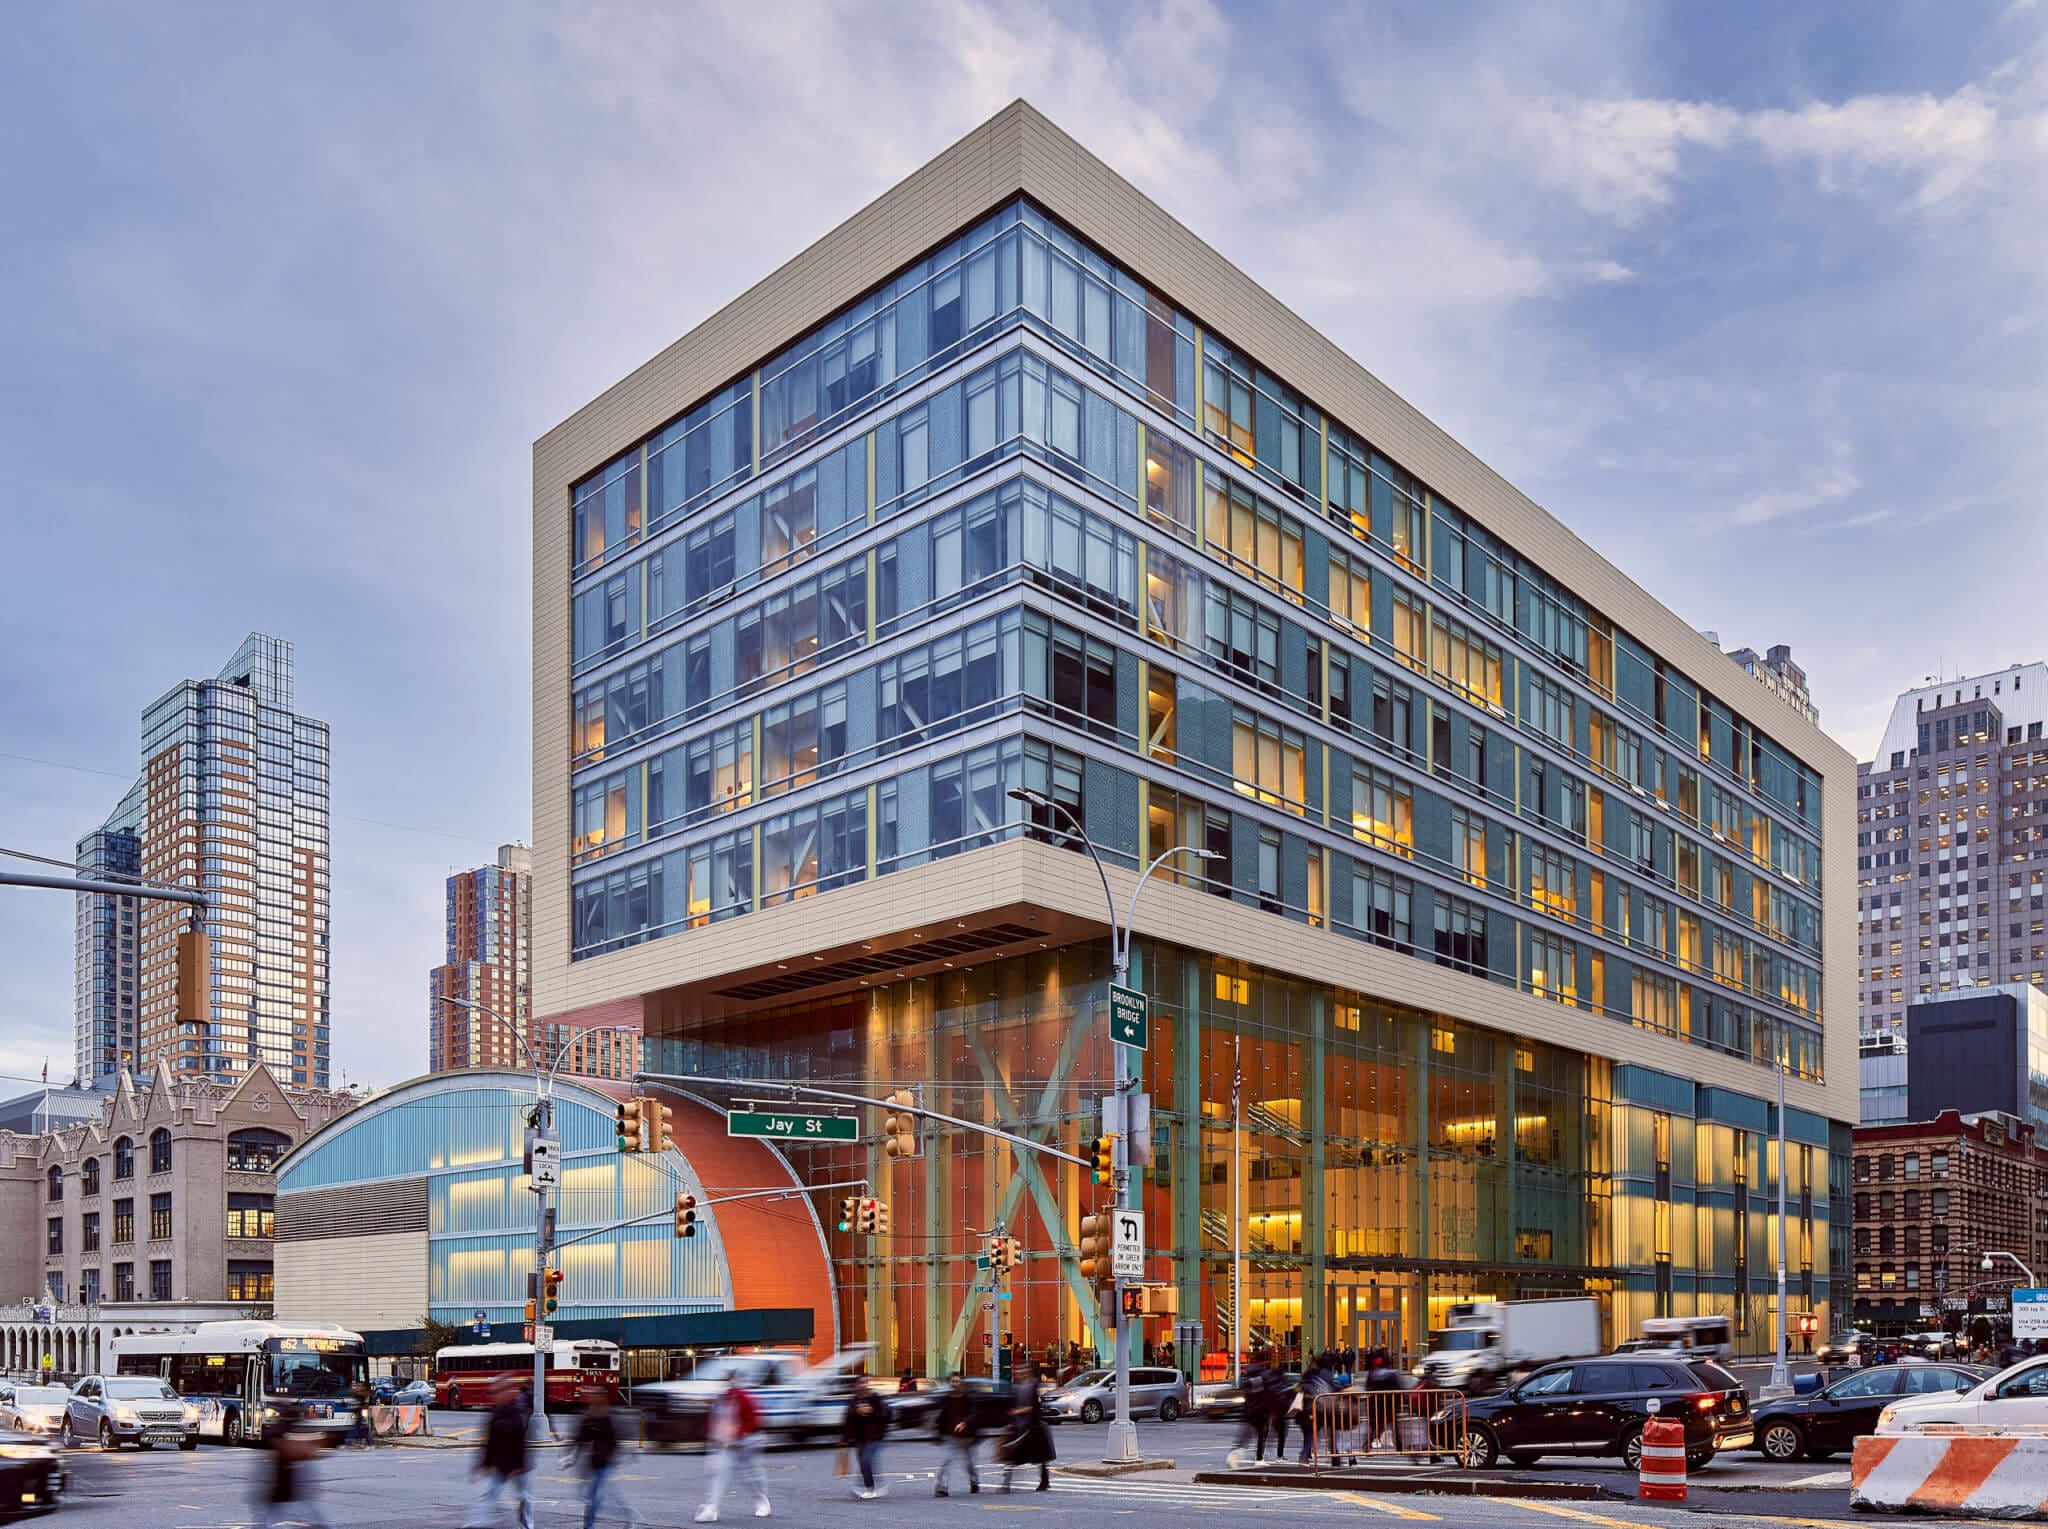 New York City College of Technology (City Tech) New Academic Complex